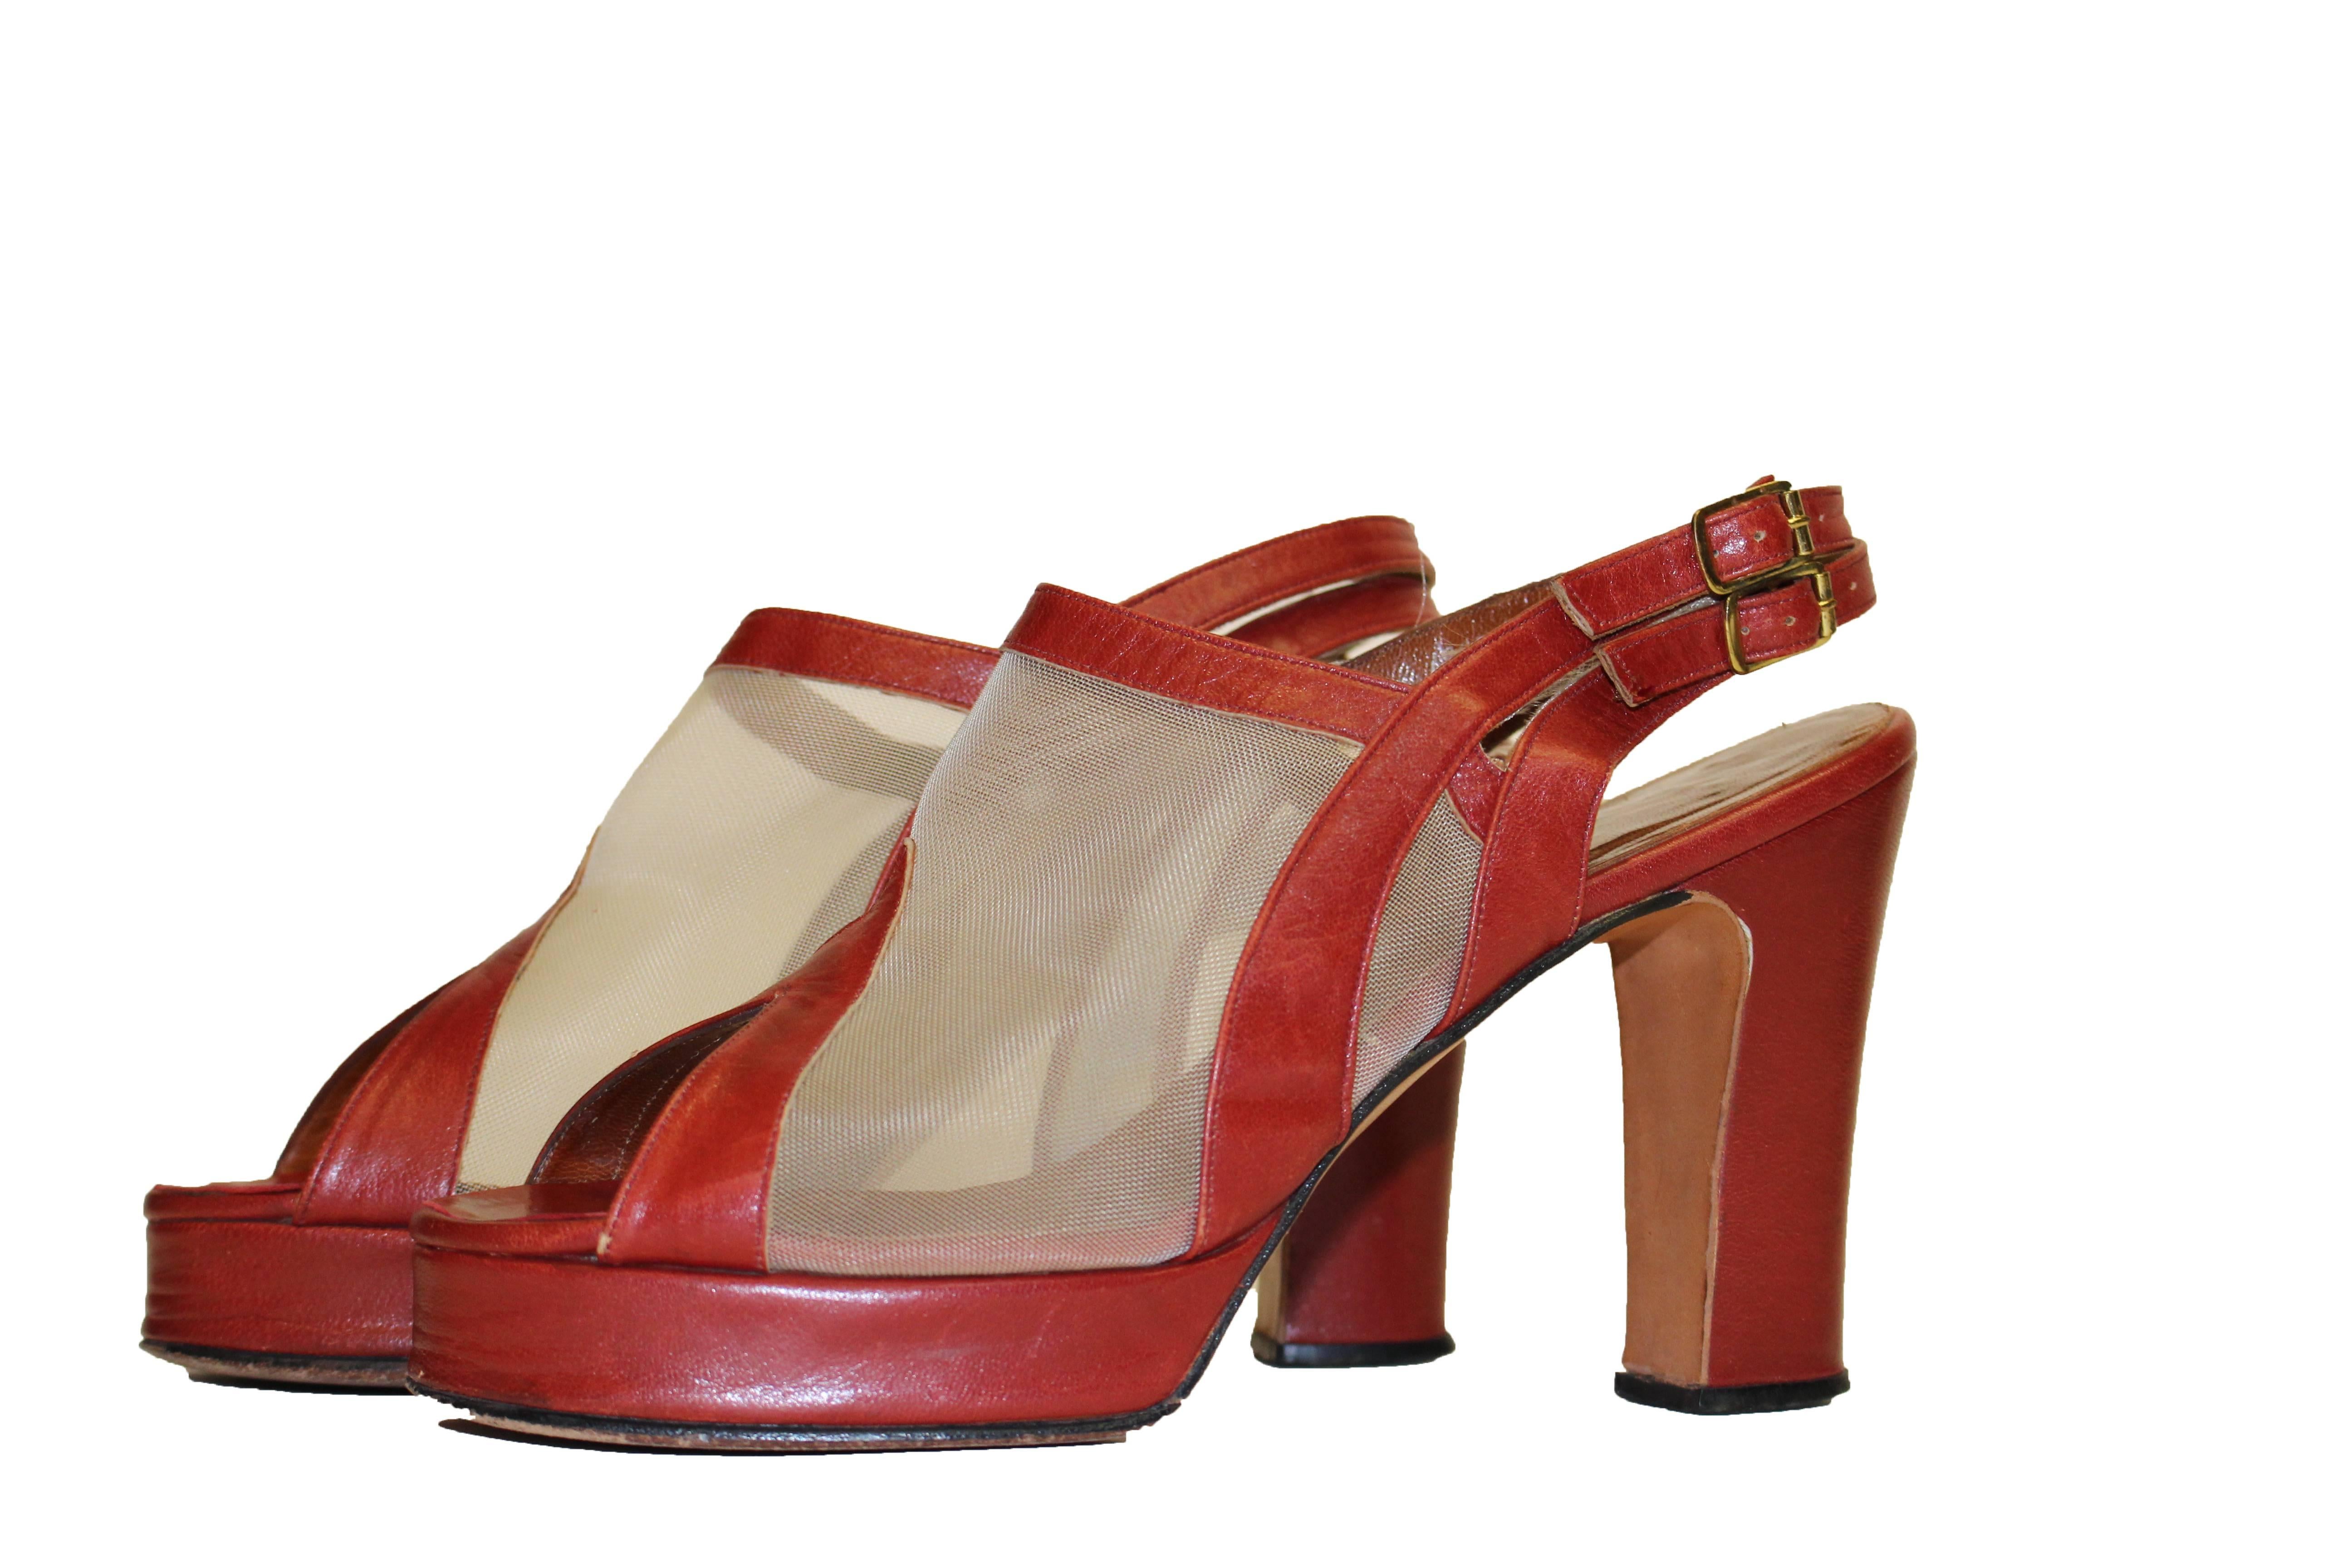 1970s red leather mesh peep toe platforms by Back Street. Double strap sling back. Mesh upper. Leather soles